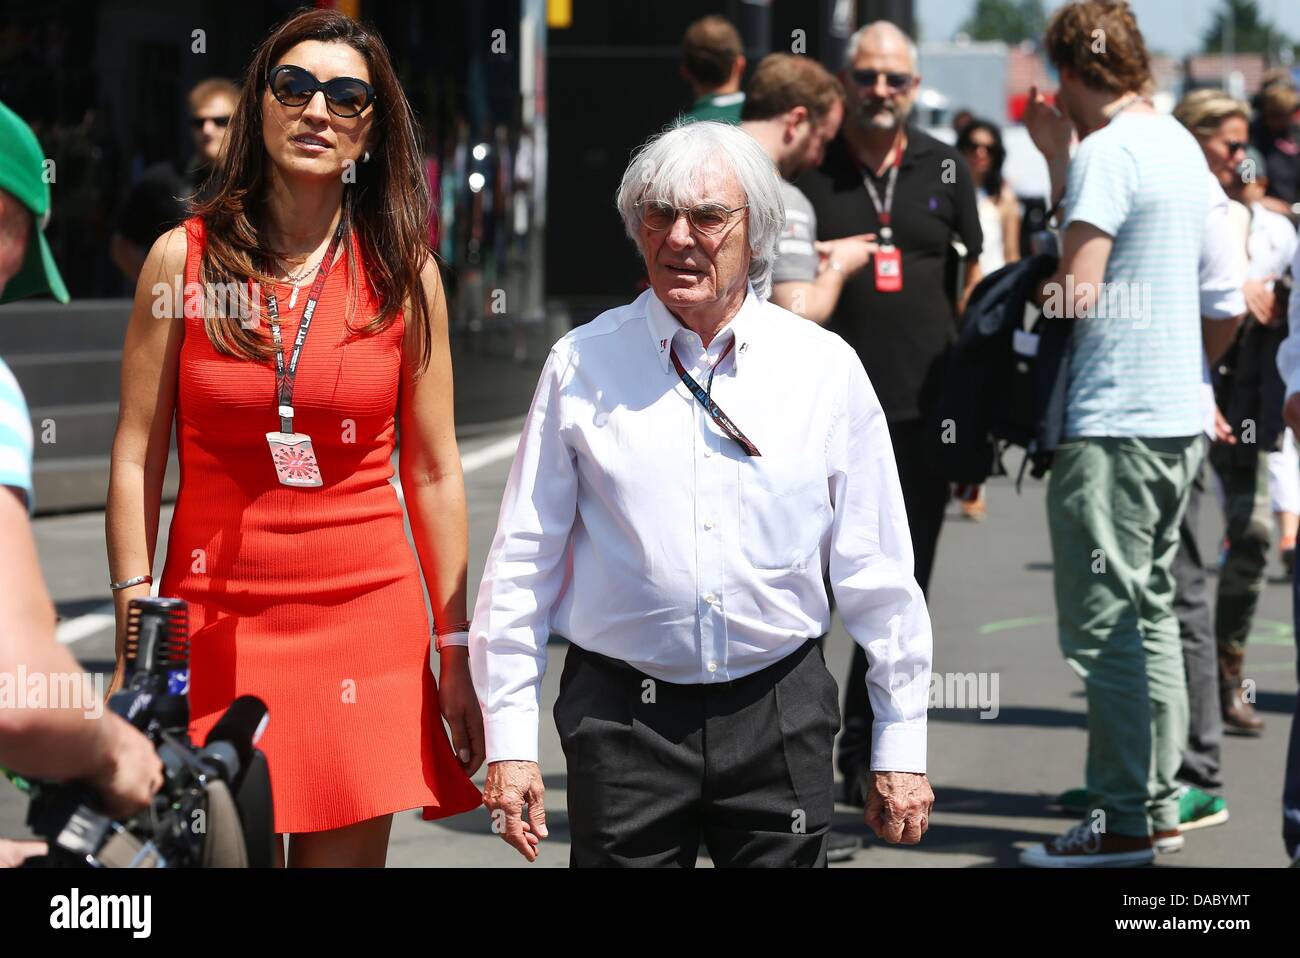 British Formula One Boss Bernie Ecclestone and his wife Fabiana Flosi seen at the Nuerburgring circuit in Nuerburg, Germany, 07 July 2013. Photo: Jens Buettner/dpa Stock Photo